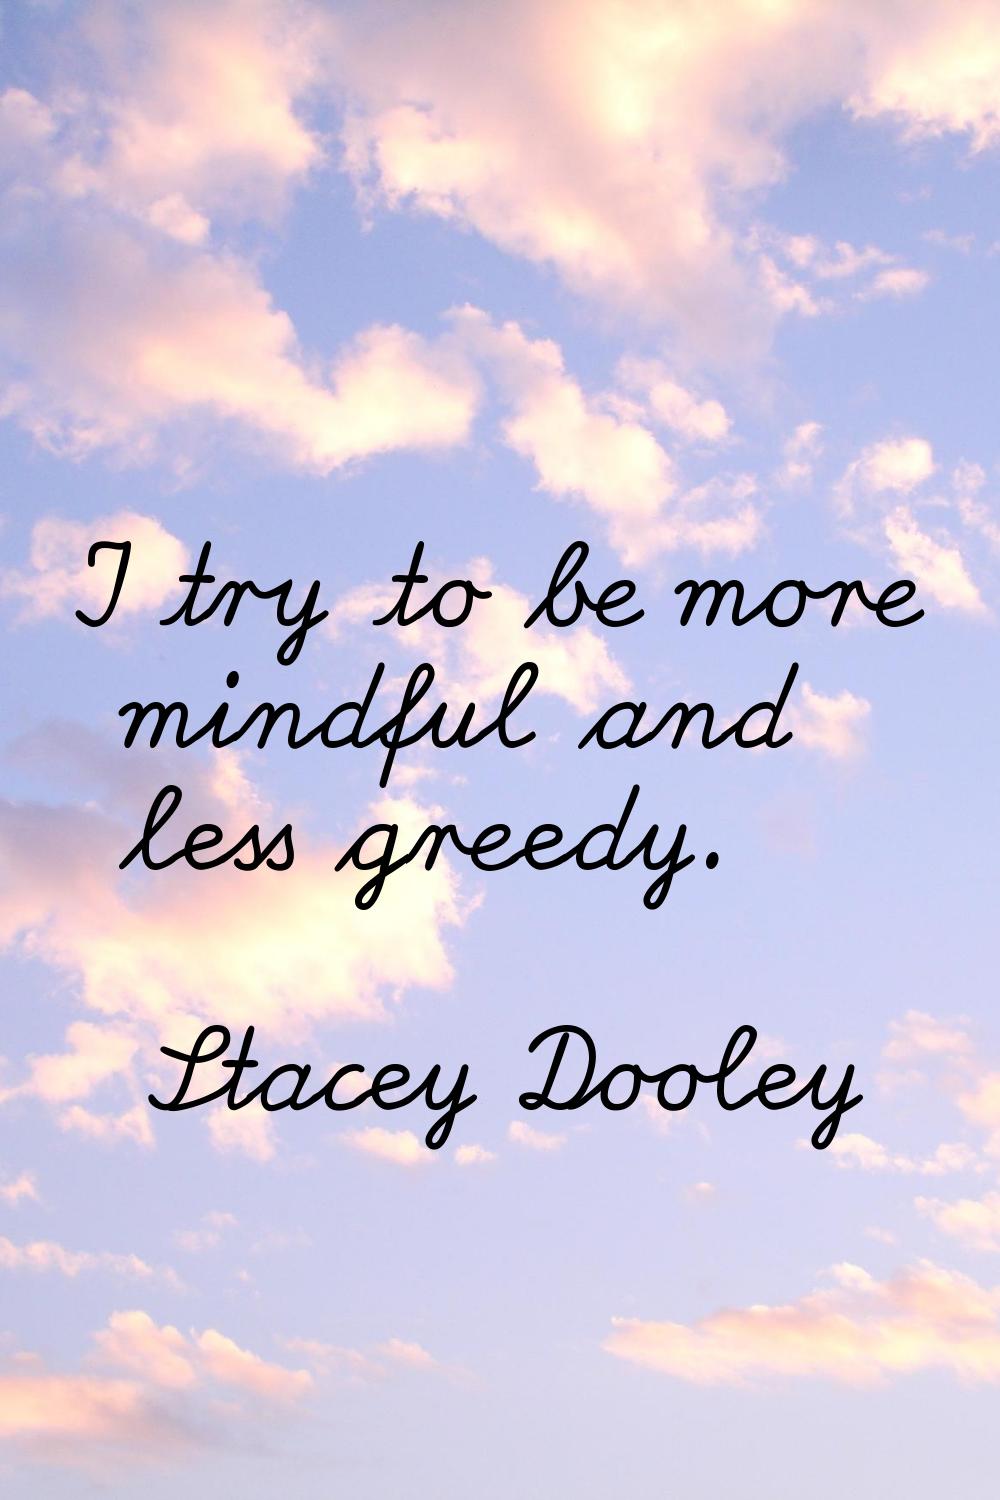 I try to be more mindful and less greedy.